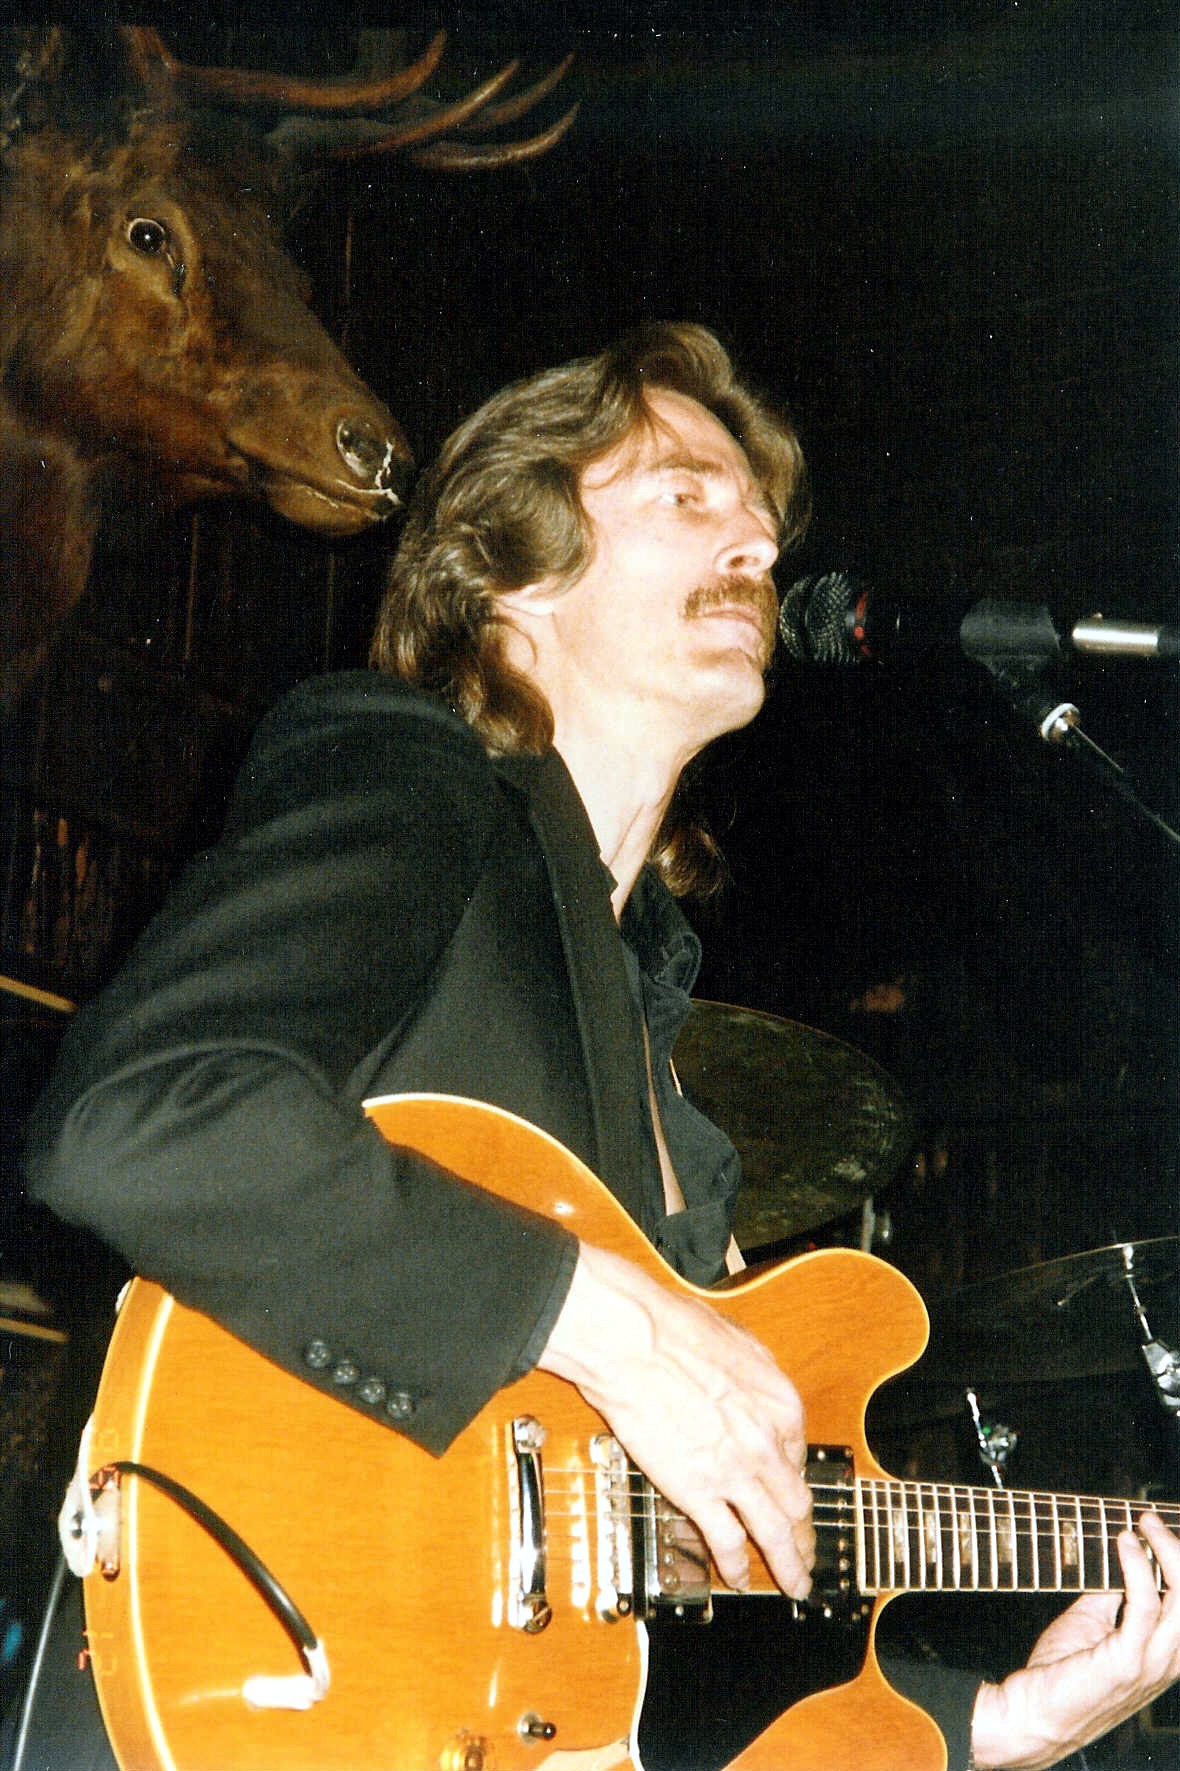 JAMES PETTEWAY @ THE WHISKEY BEND c. 1987